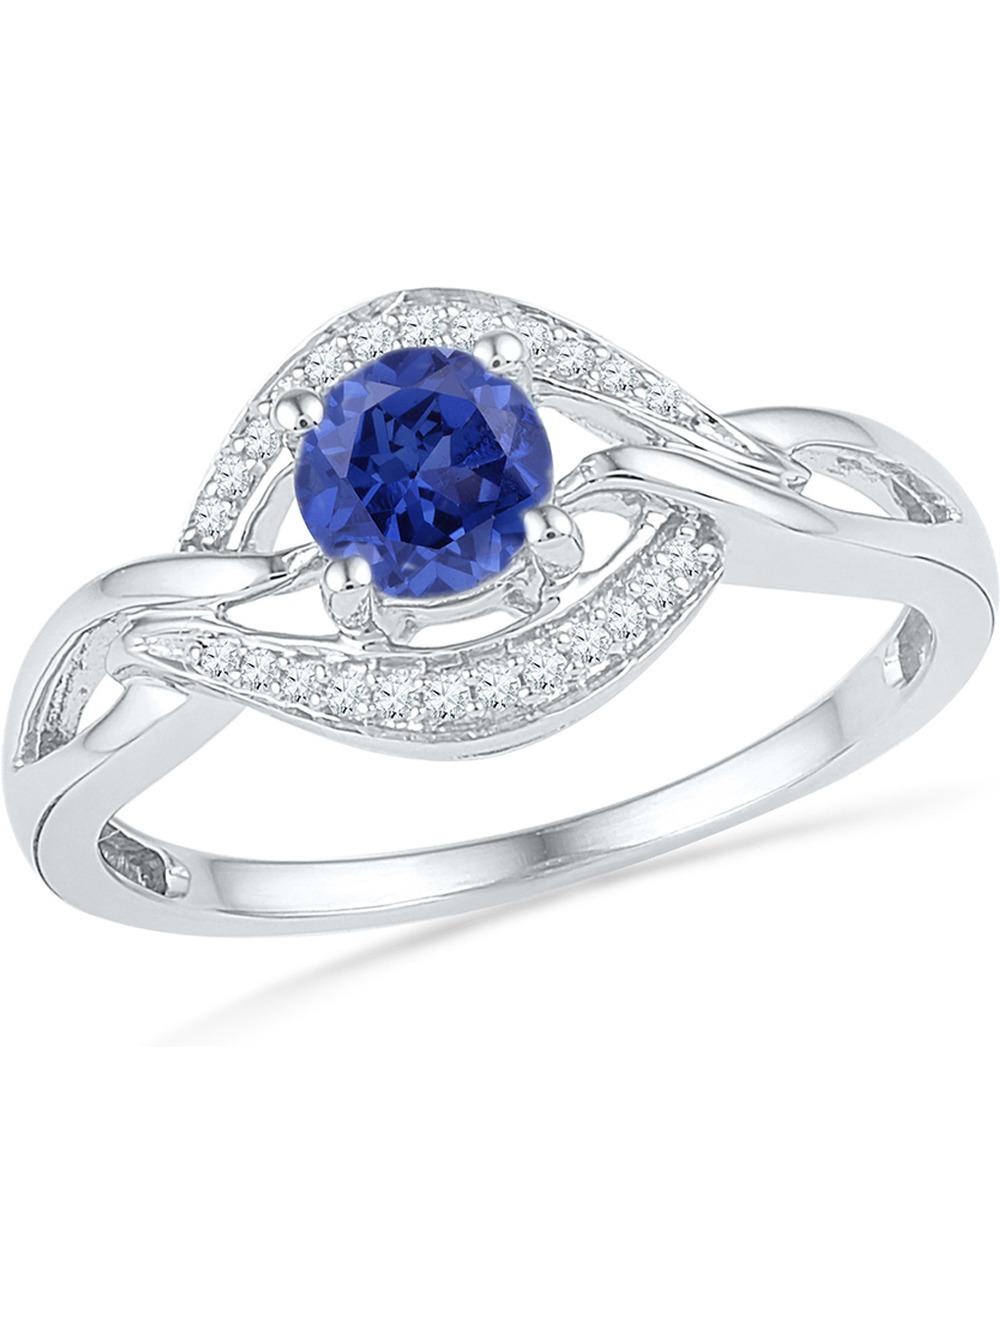 Lab Created Blue Sapphire 1/2 Carat (Ctw) Ring in Sterling Silver with ...